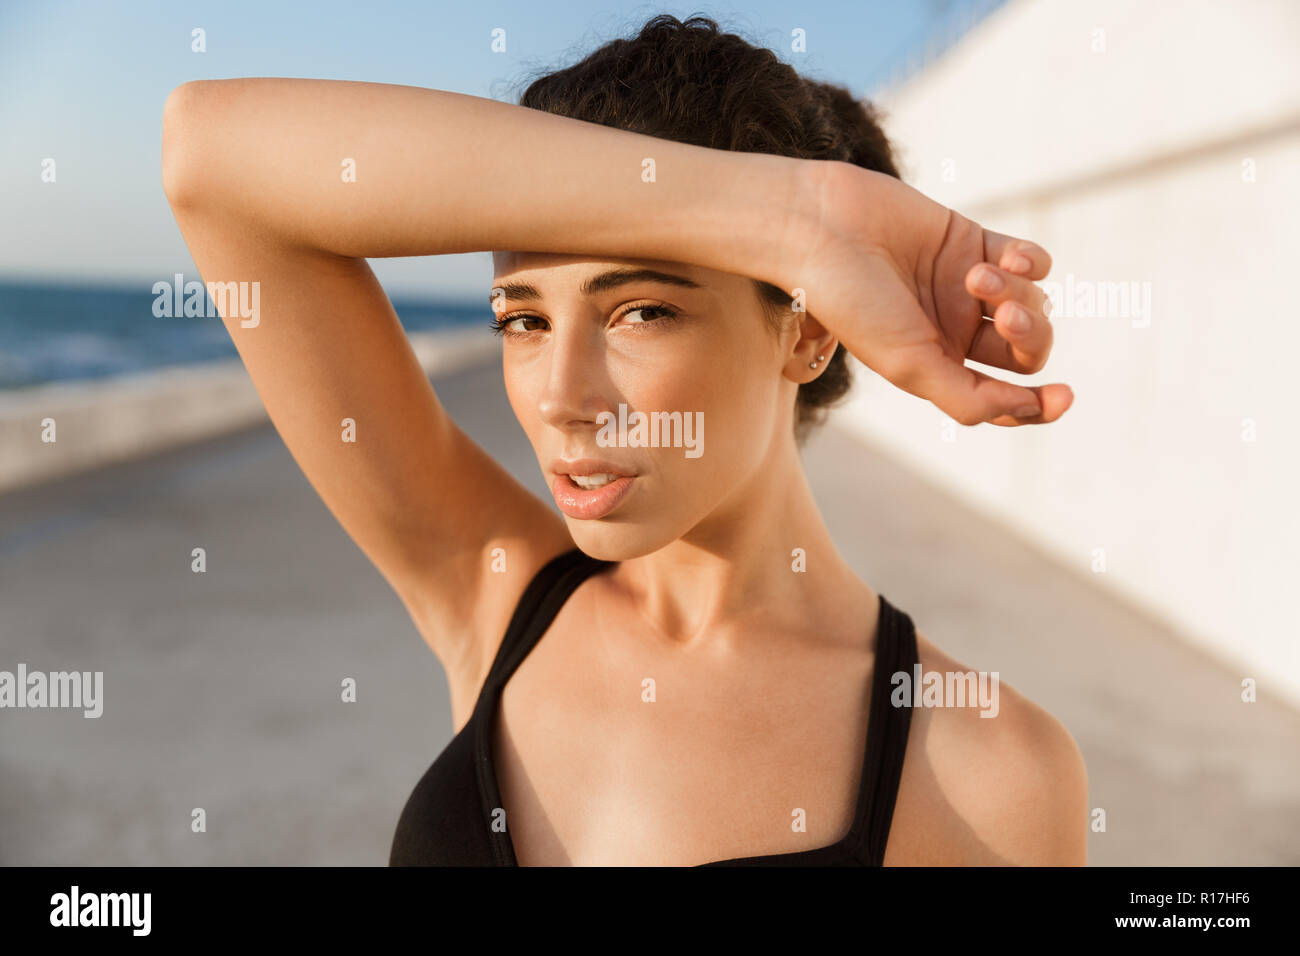 Exhausted young sportswoman standing outdoors, wiping forehead with hand Stock Photo